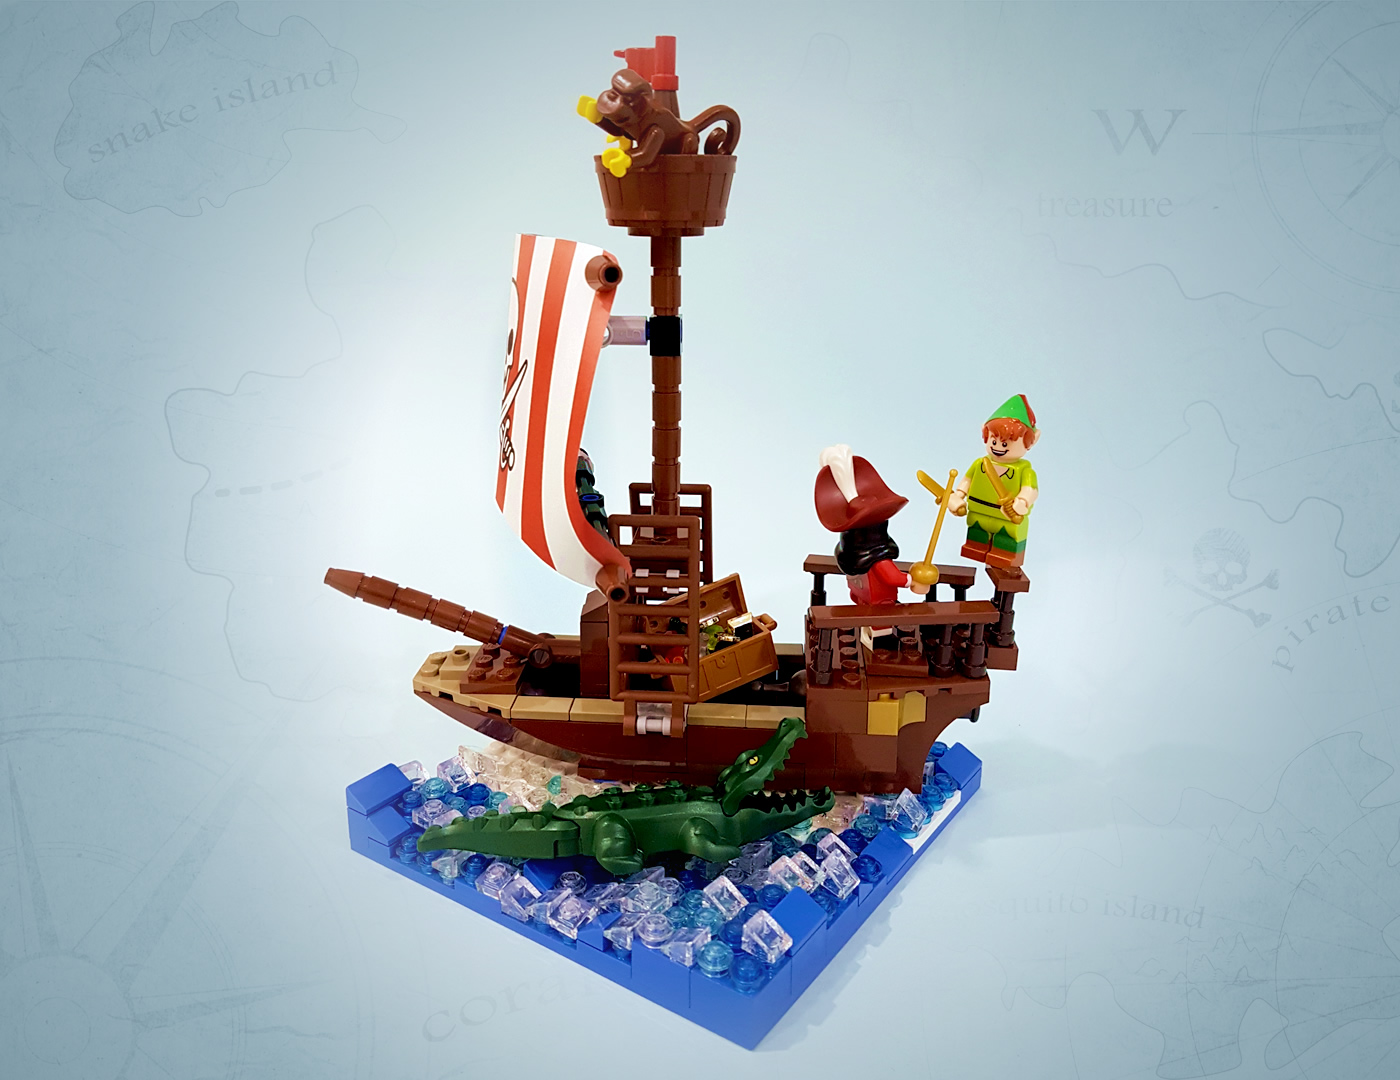 Peter Pan and Captain Hook” by Angela Chung – MOCs – The Ultimate